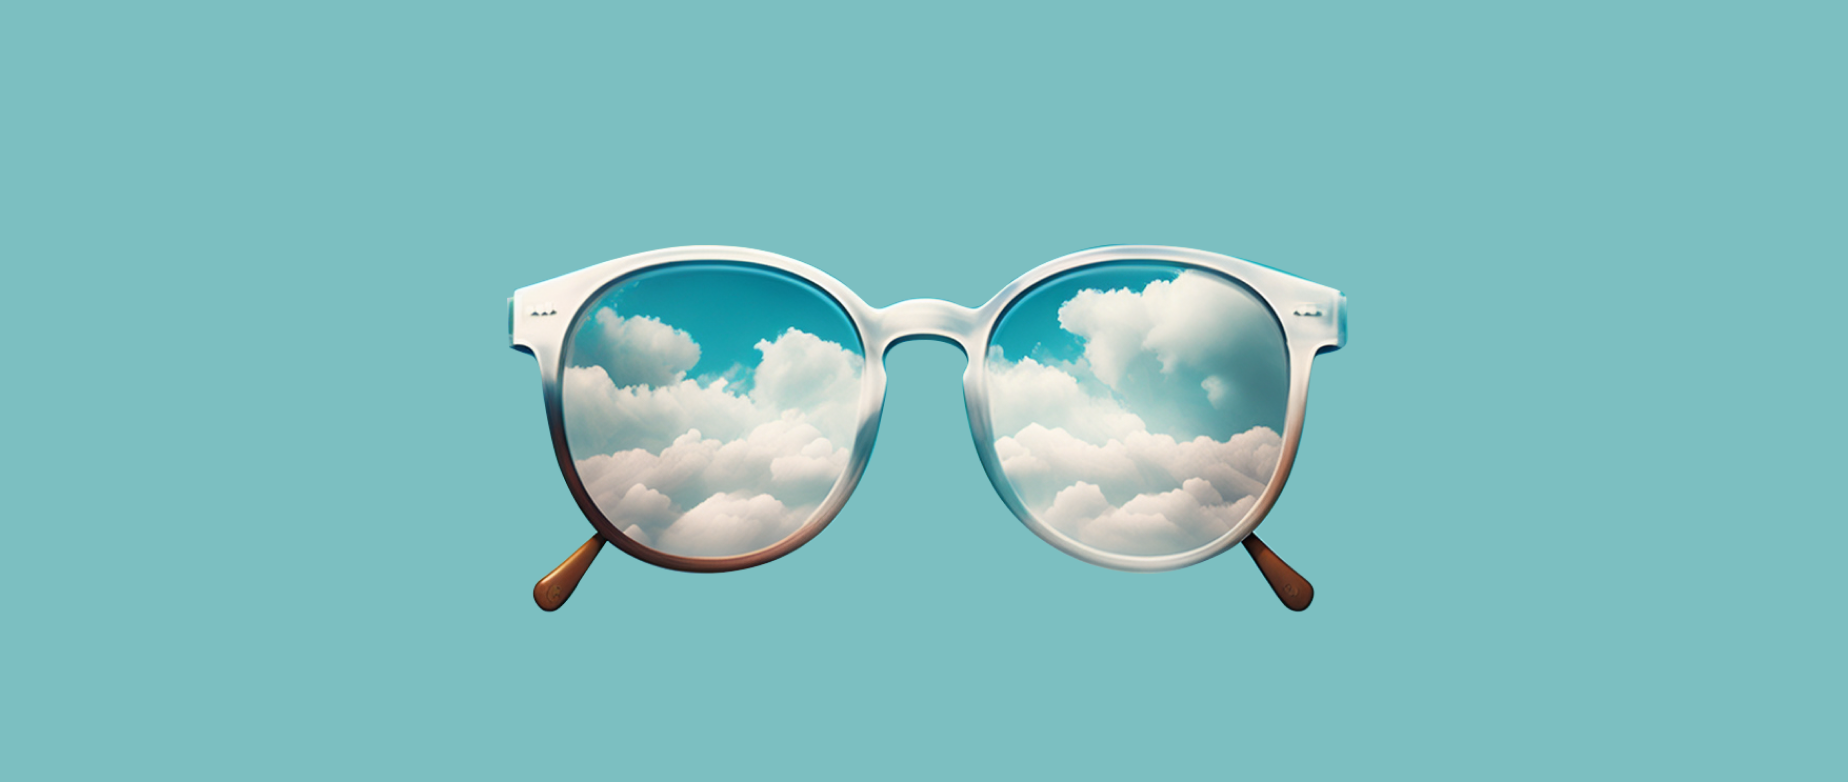 Cover image: Close-up shot of a pair of silver sunglasses showing the sky and clouds reflected in the lenses.